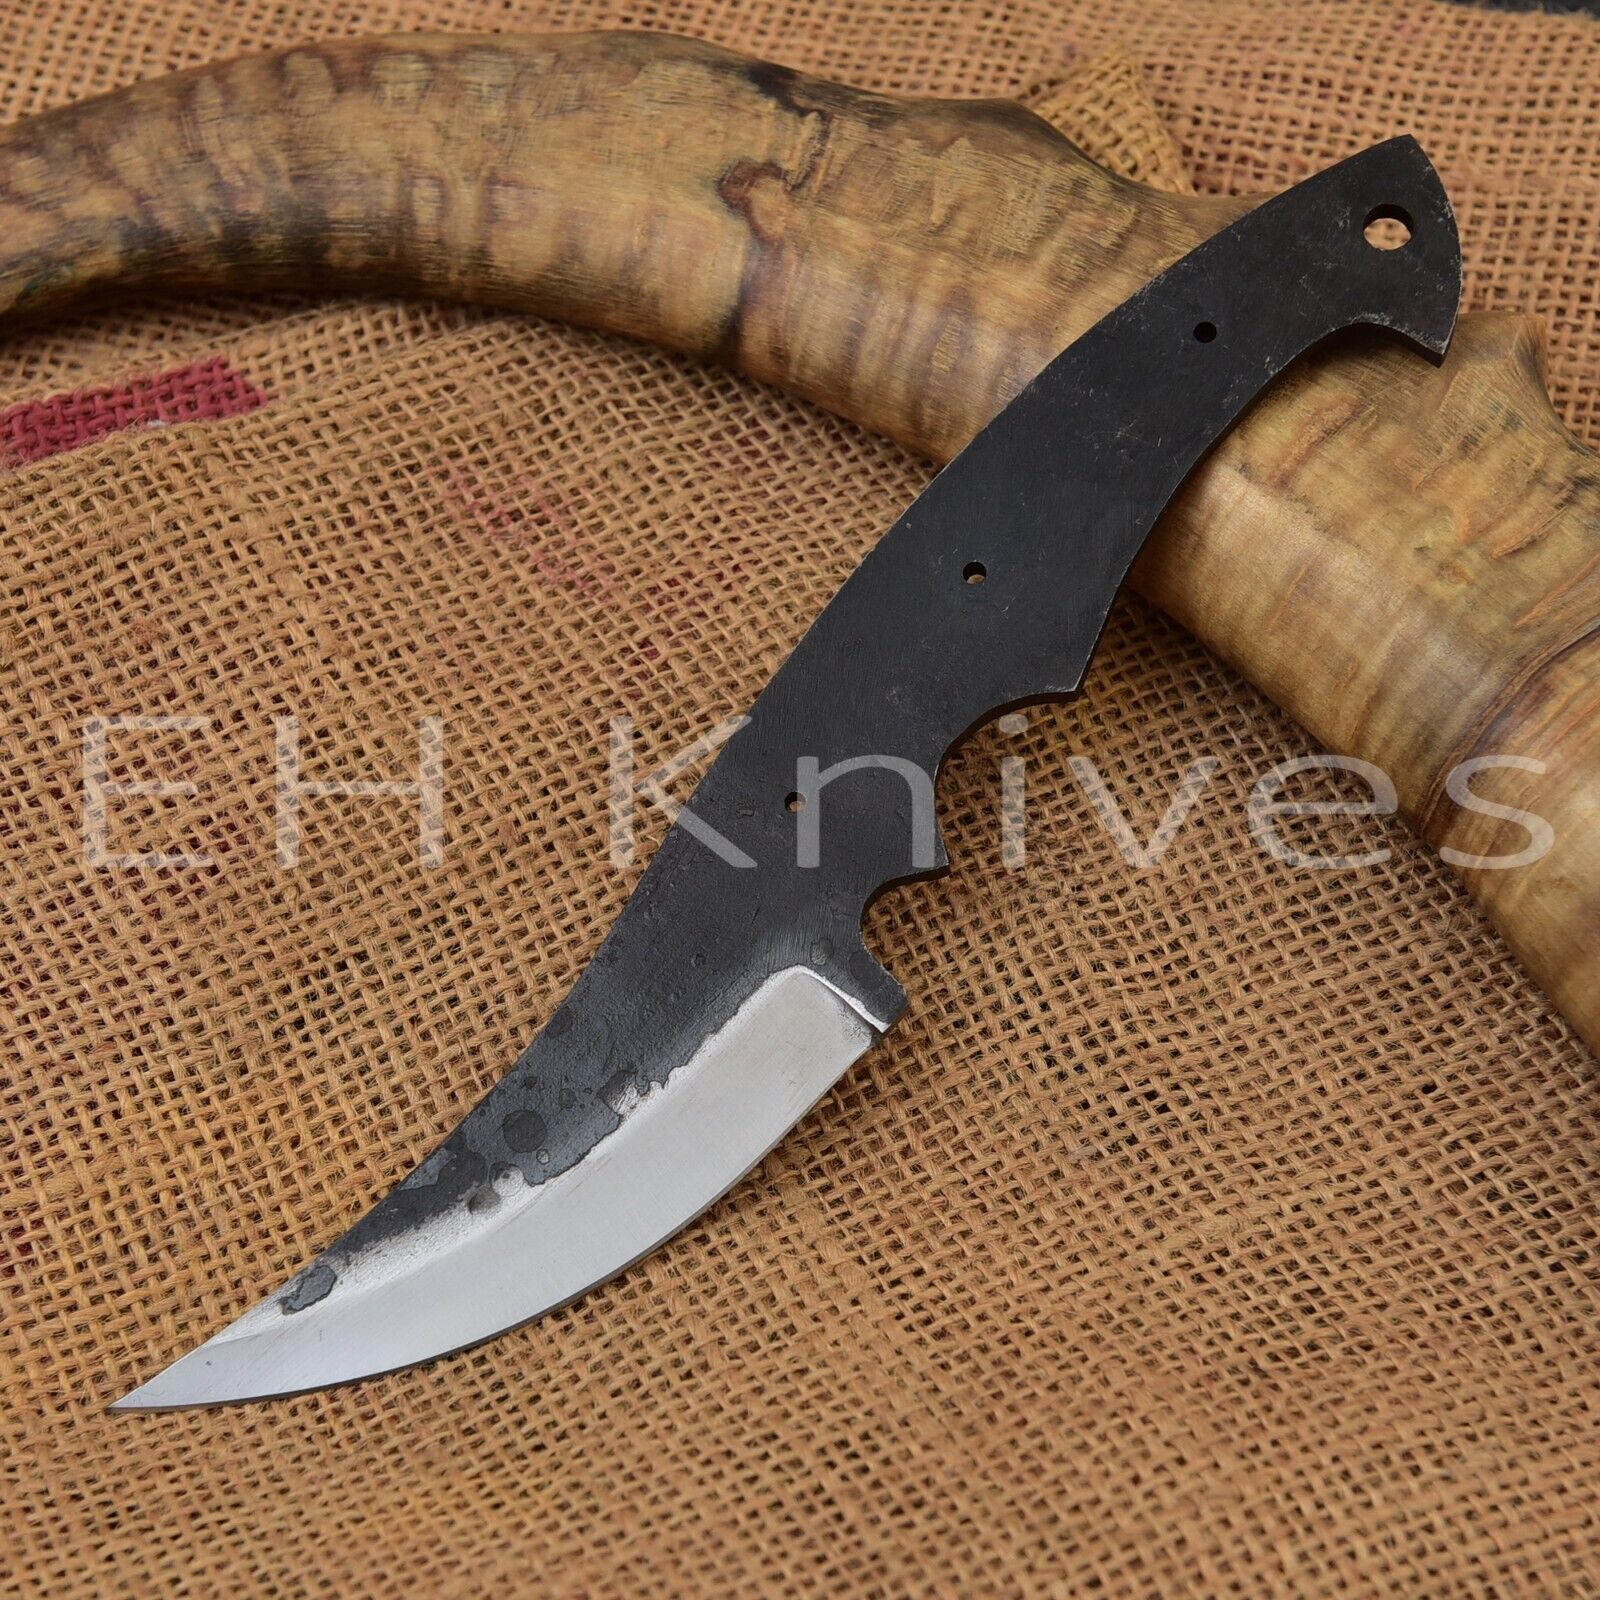 8 INCH CUSTOM FORGED 1095 CARBON STEEL HUNTING SKINNING BLANK BLADE KNIFE 230